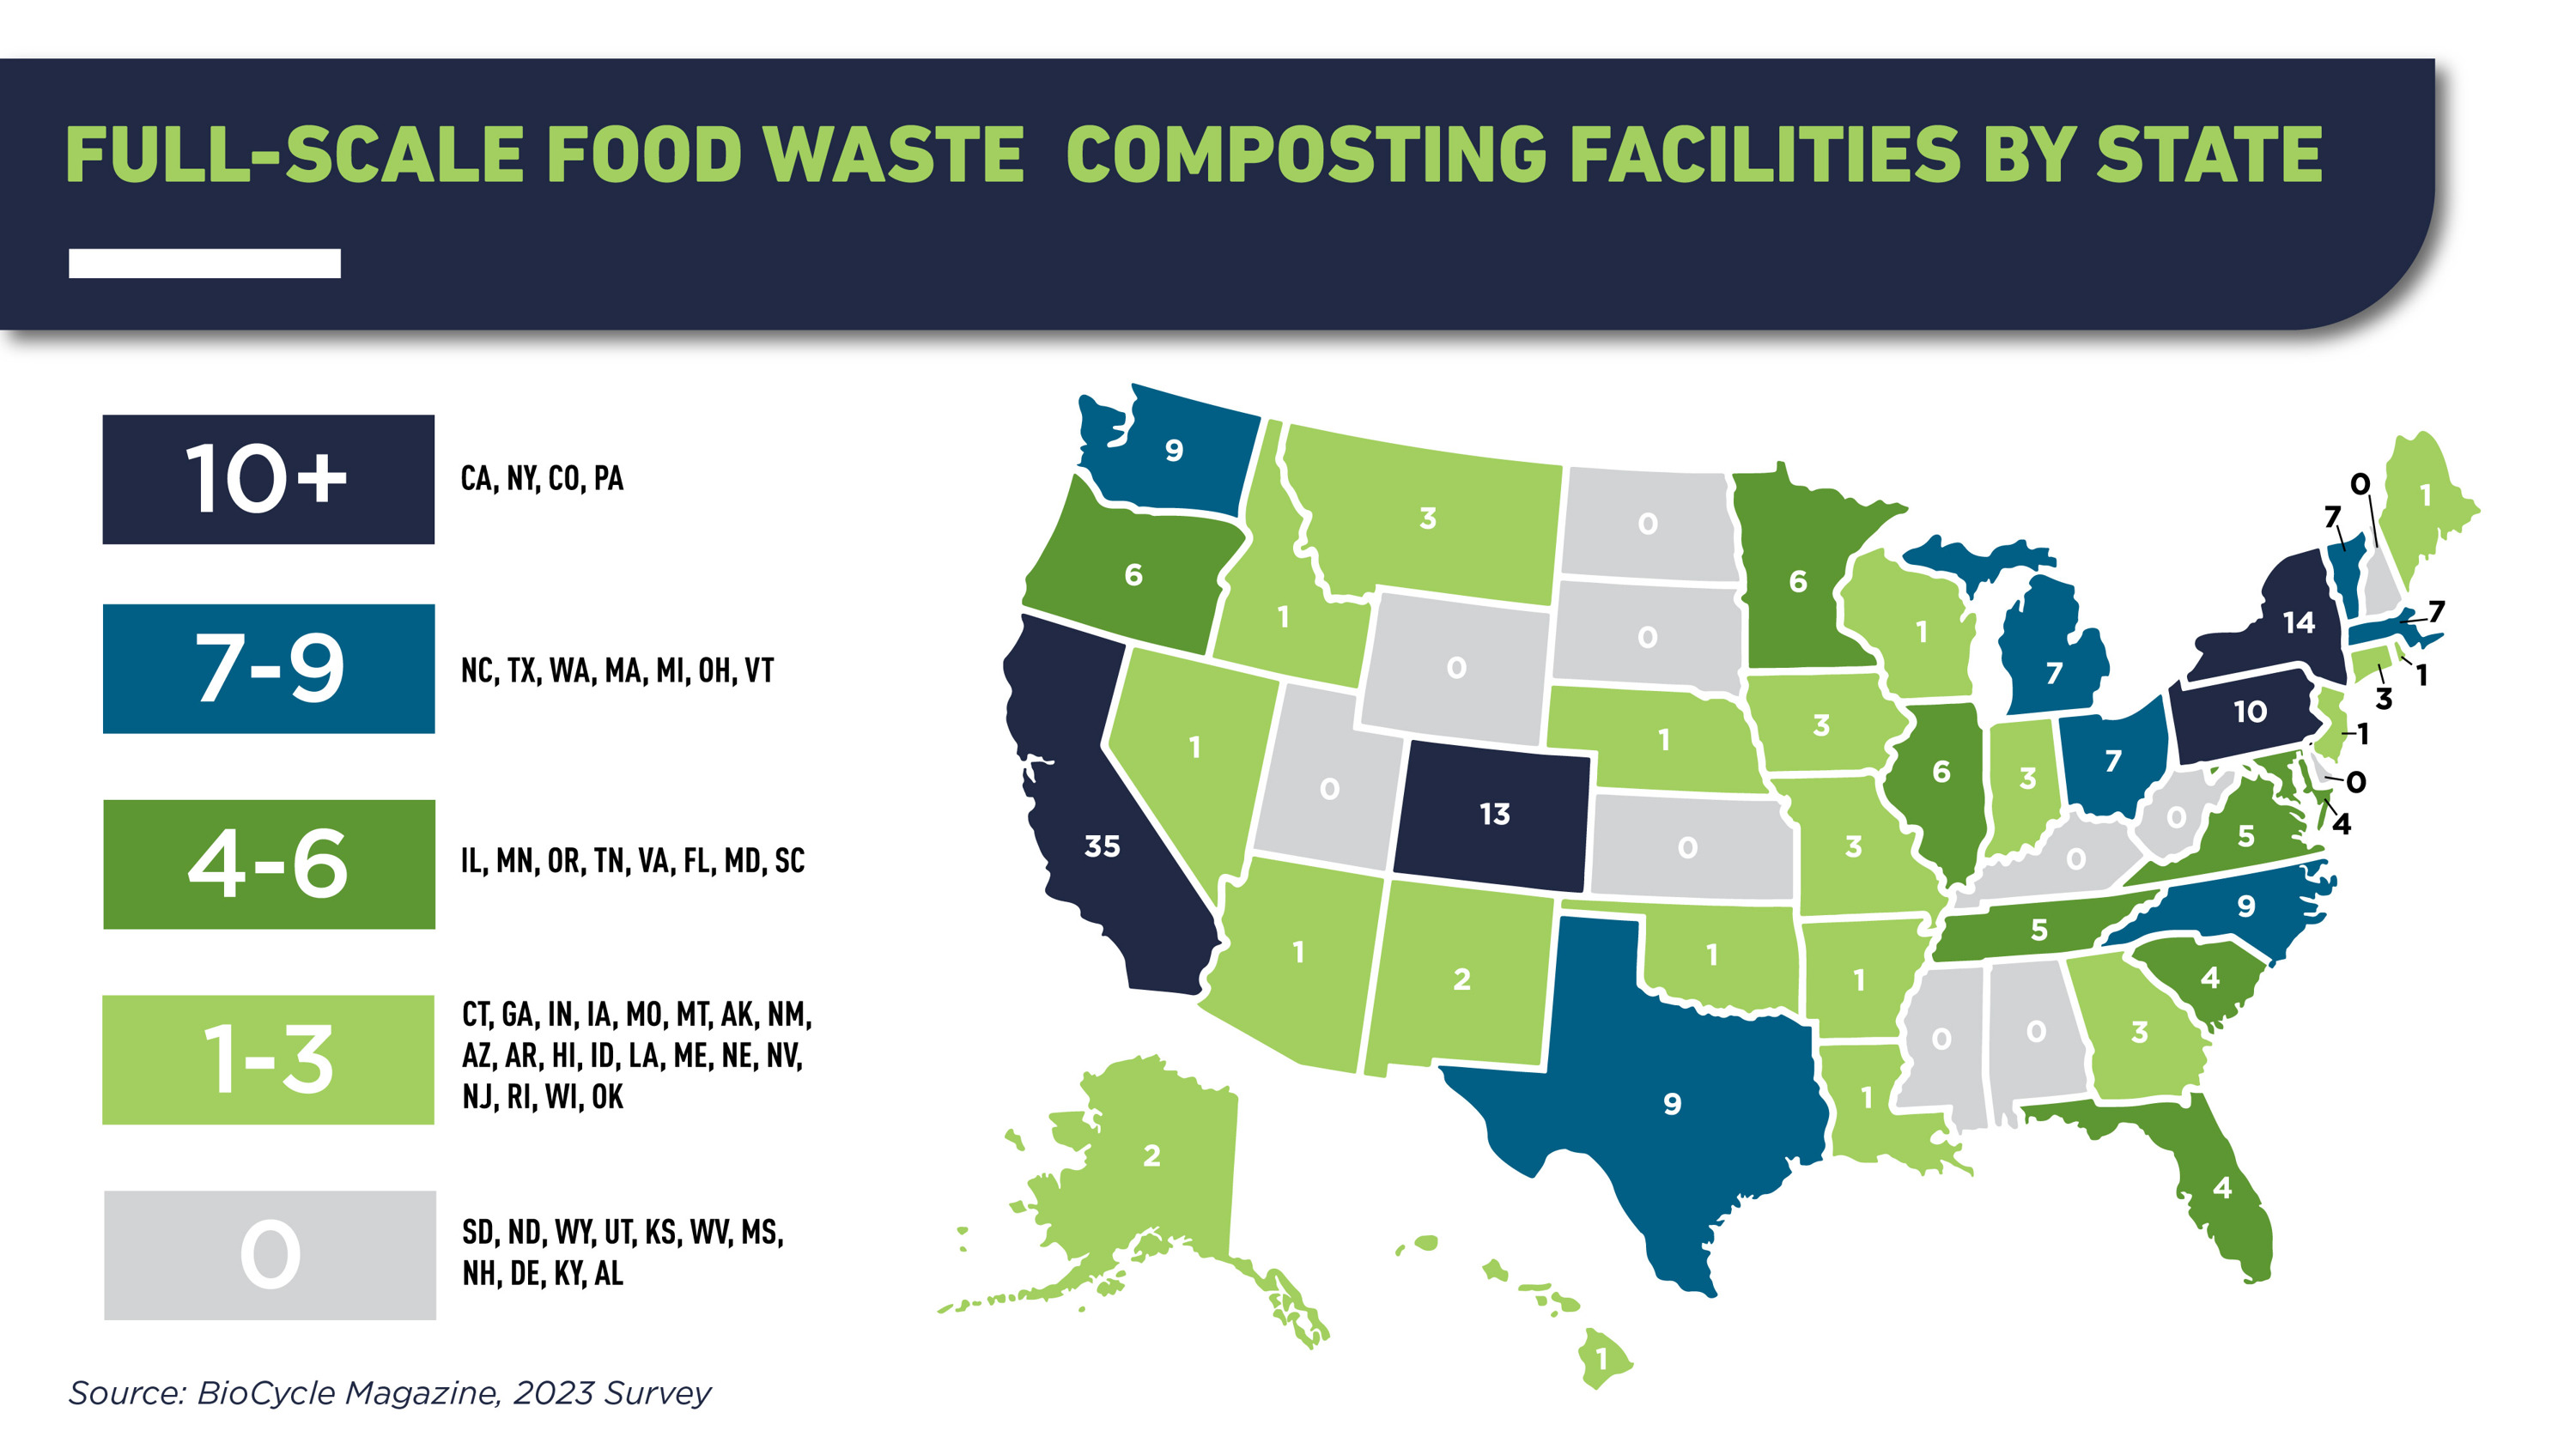 Mape of Full-Scale Food Waste Composting Facilities by State